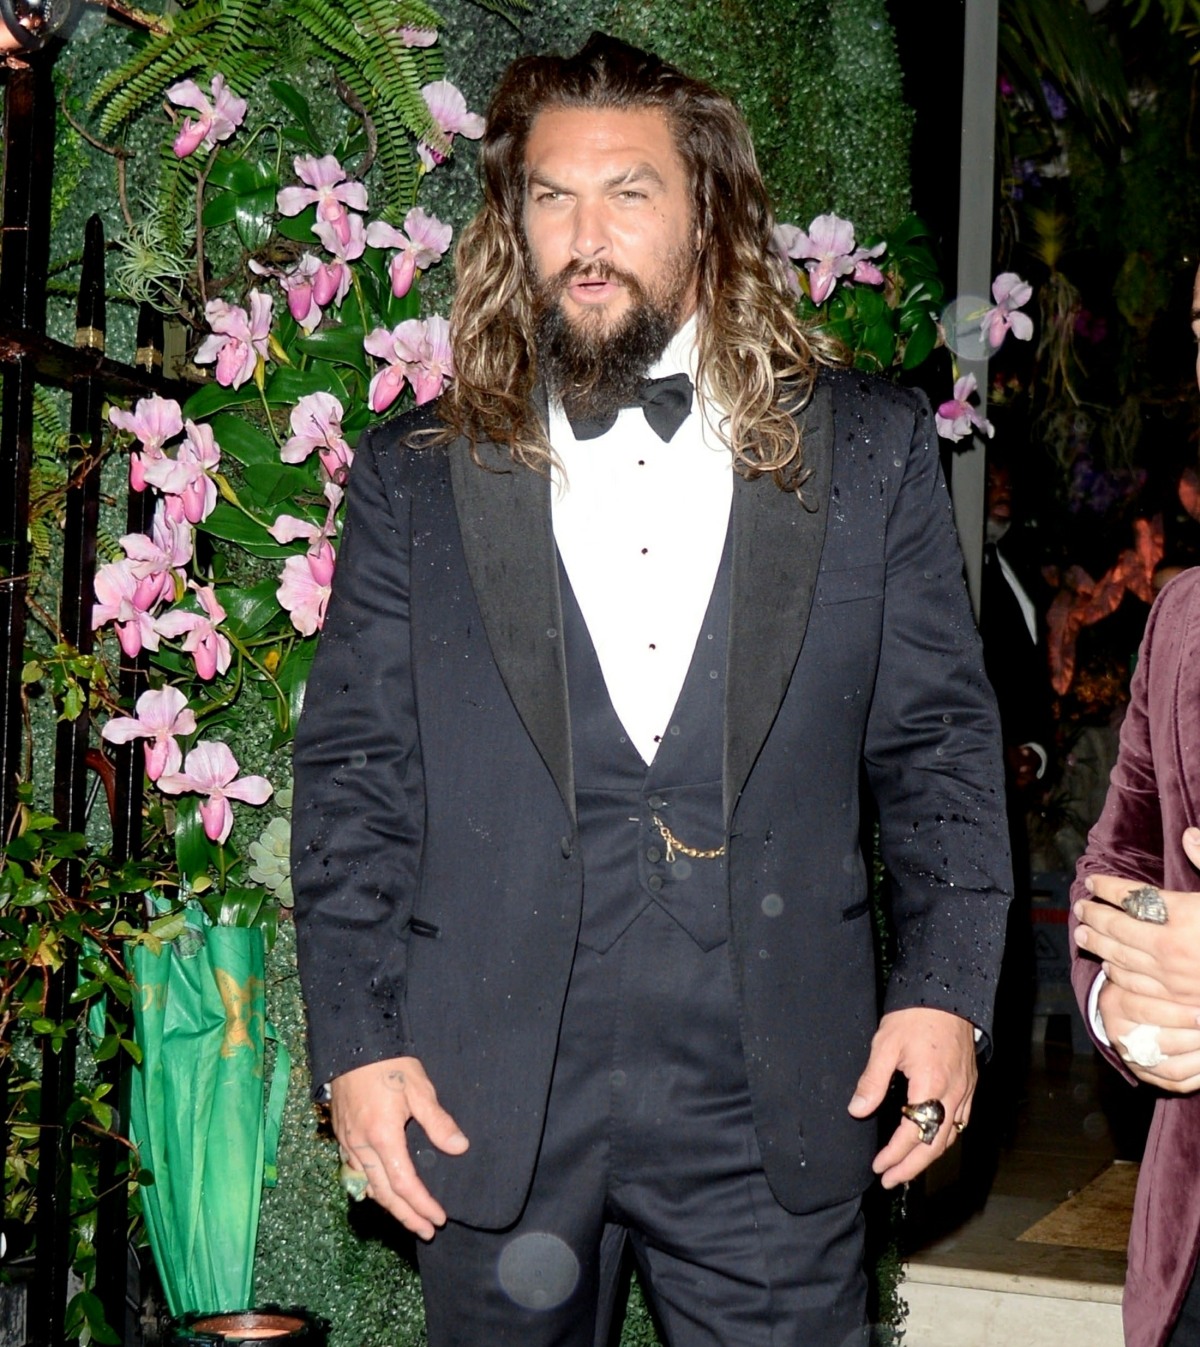 Jason Momoa and Emma Weymouth are pictured arriving at the James Bond's 'No Time To Die' World Film afterparty in London